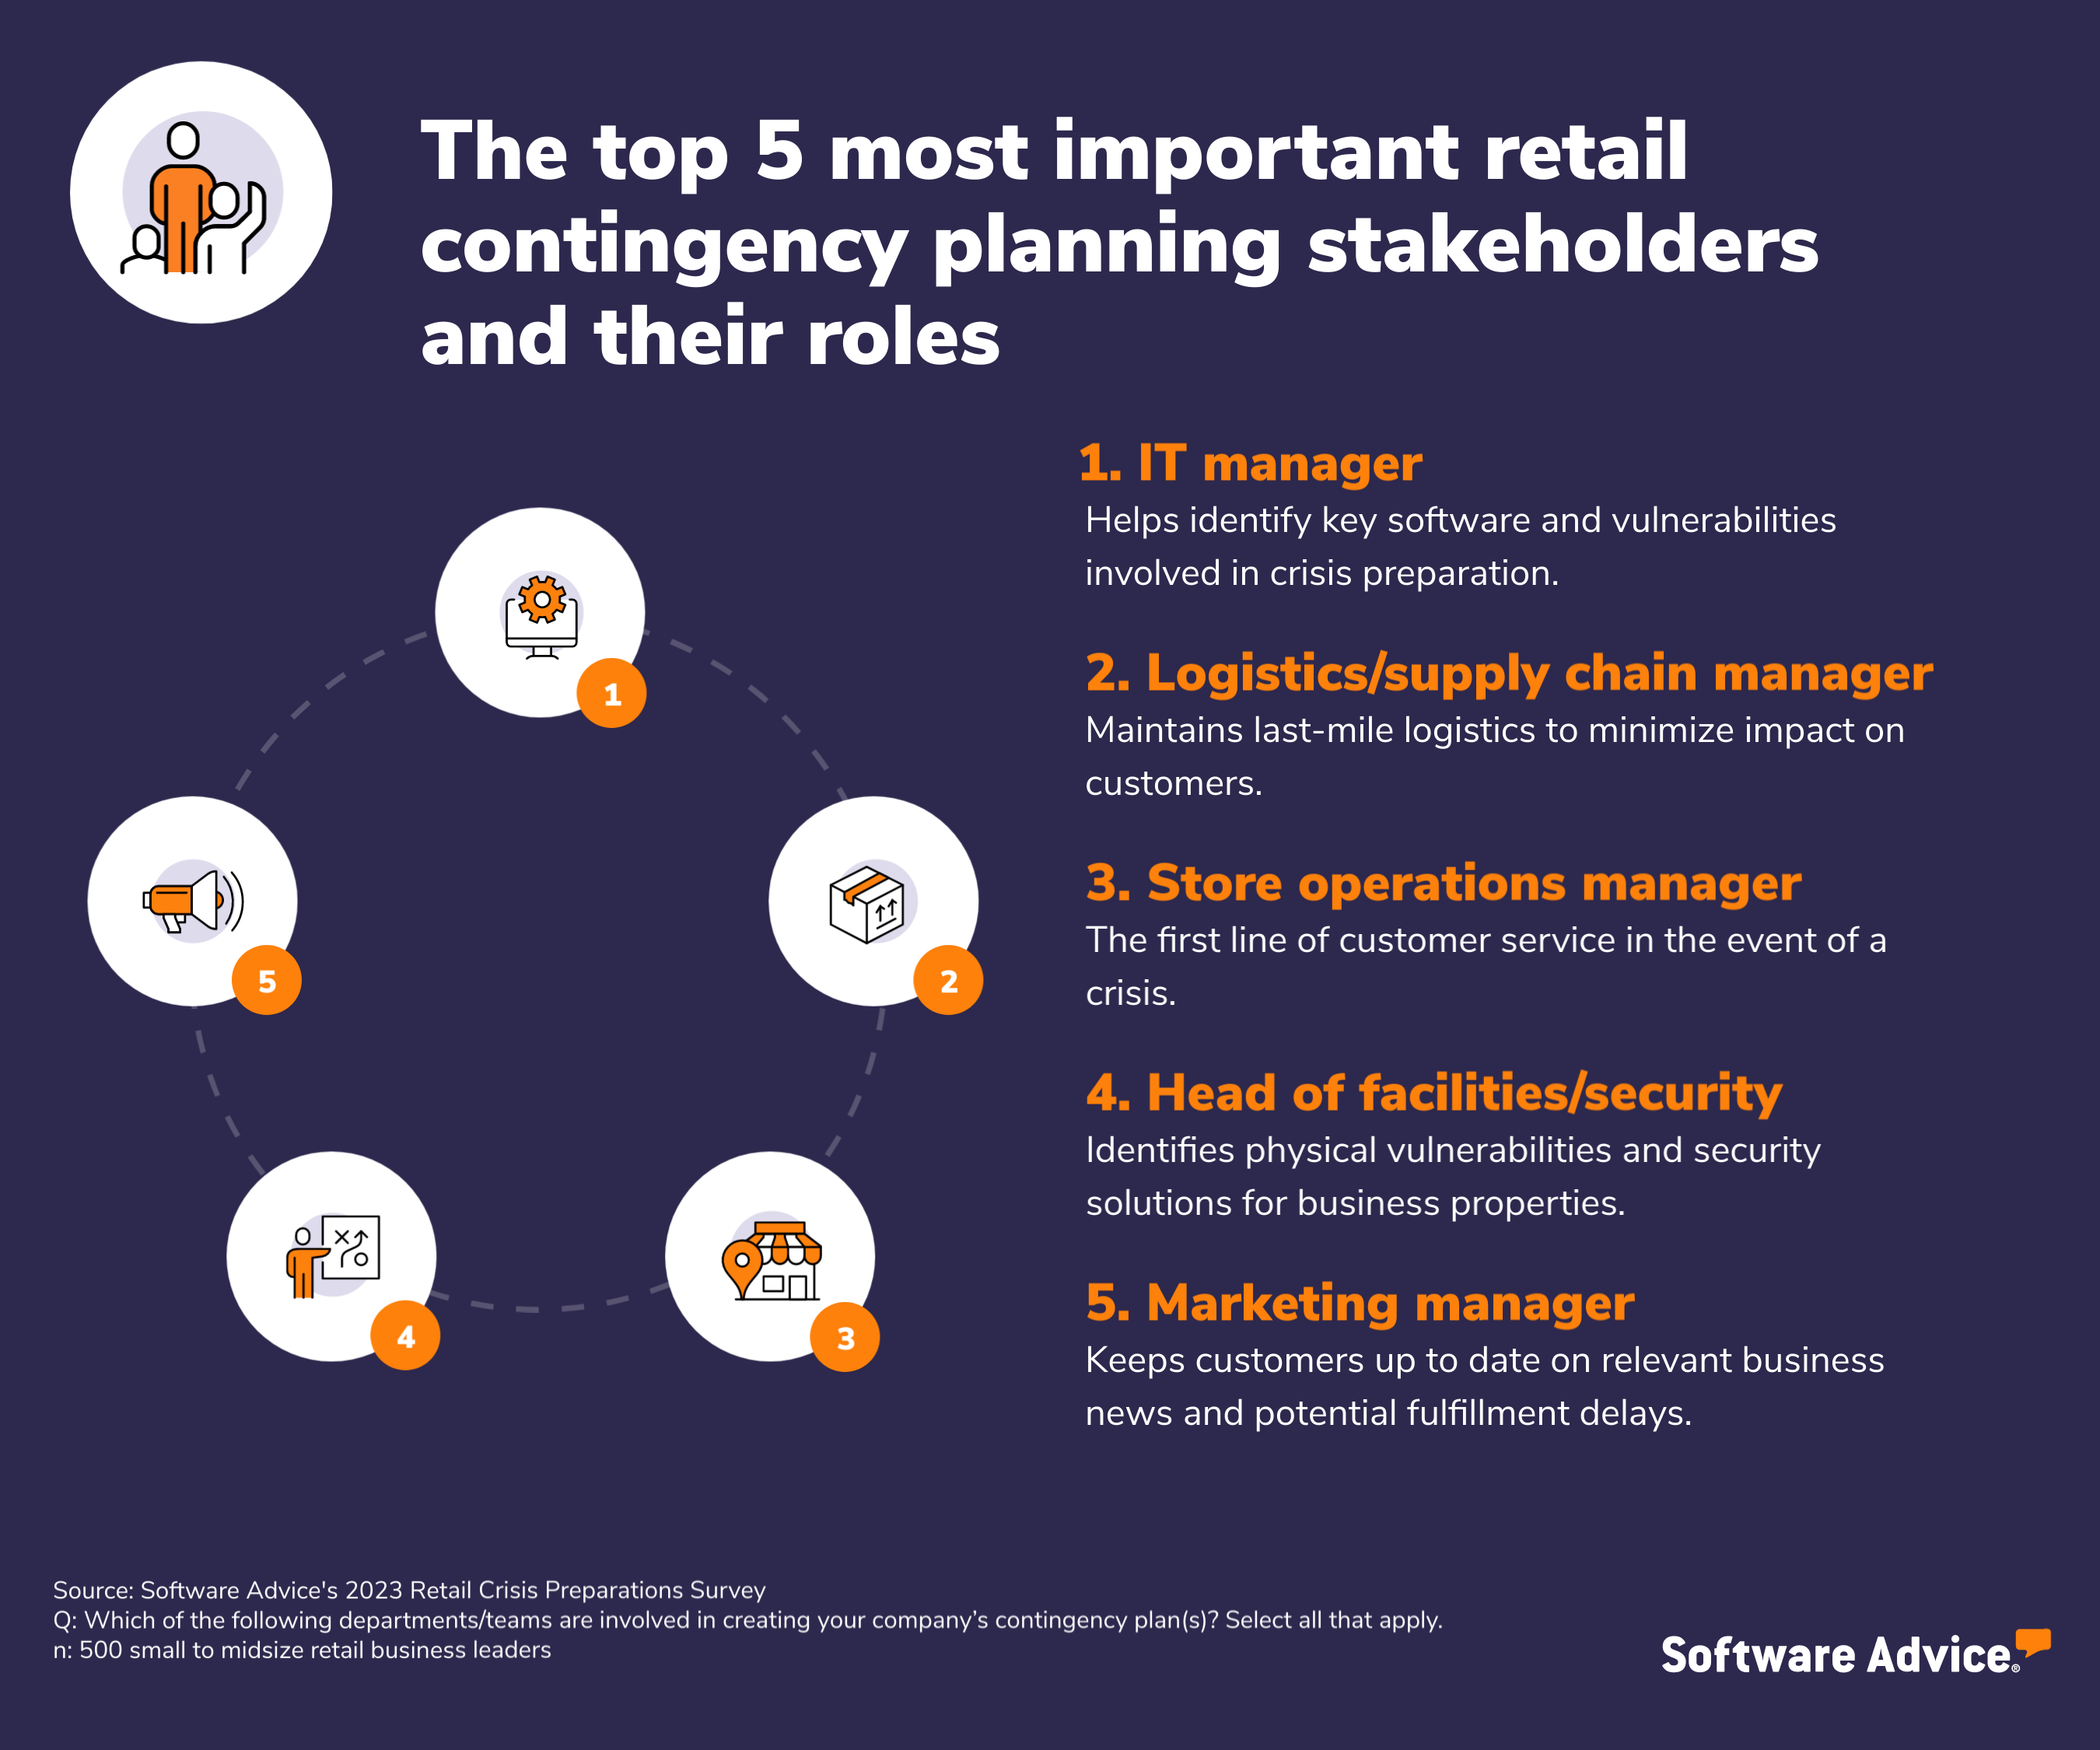 Graphic showing the top 5 most important retail contingency planning stakeholders and their roles